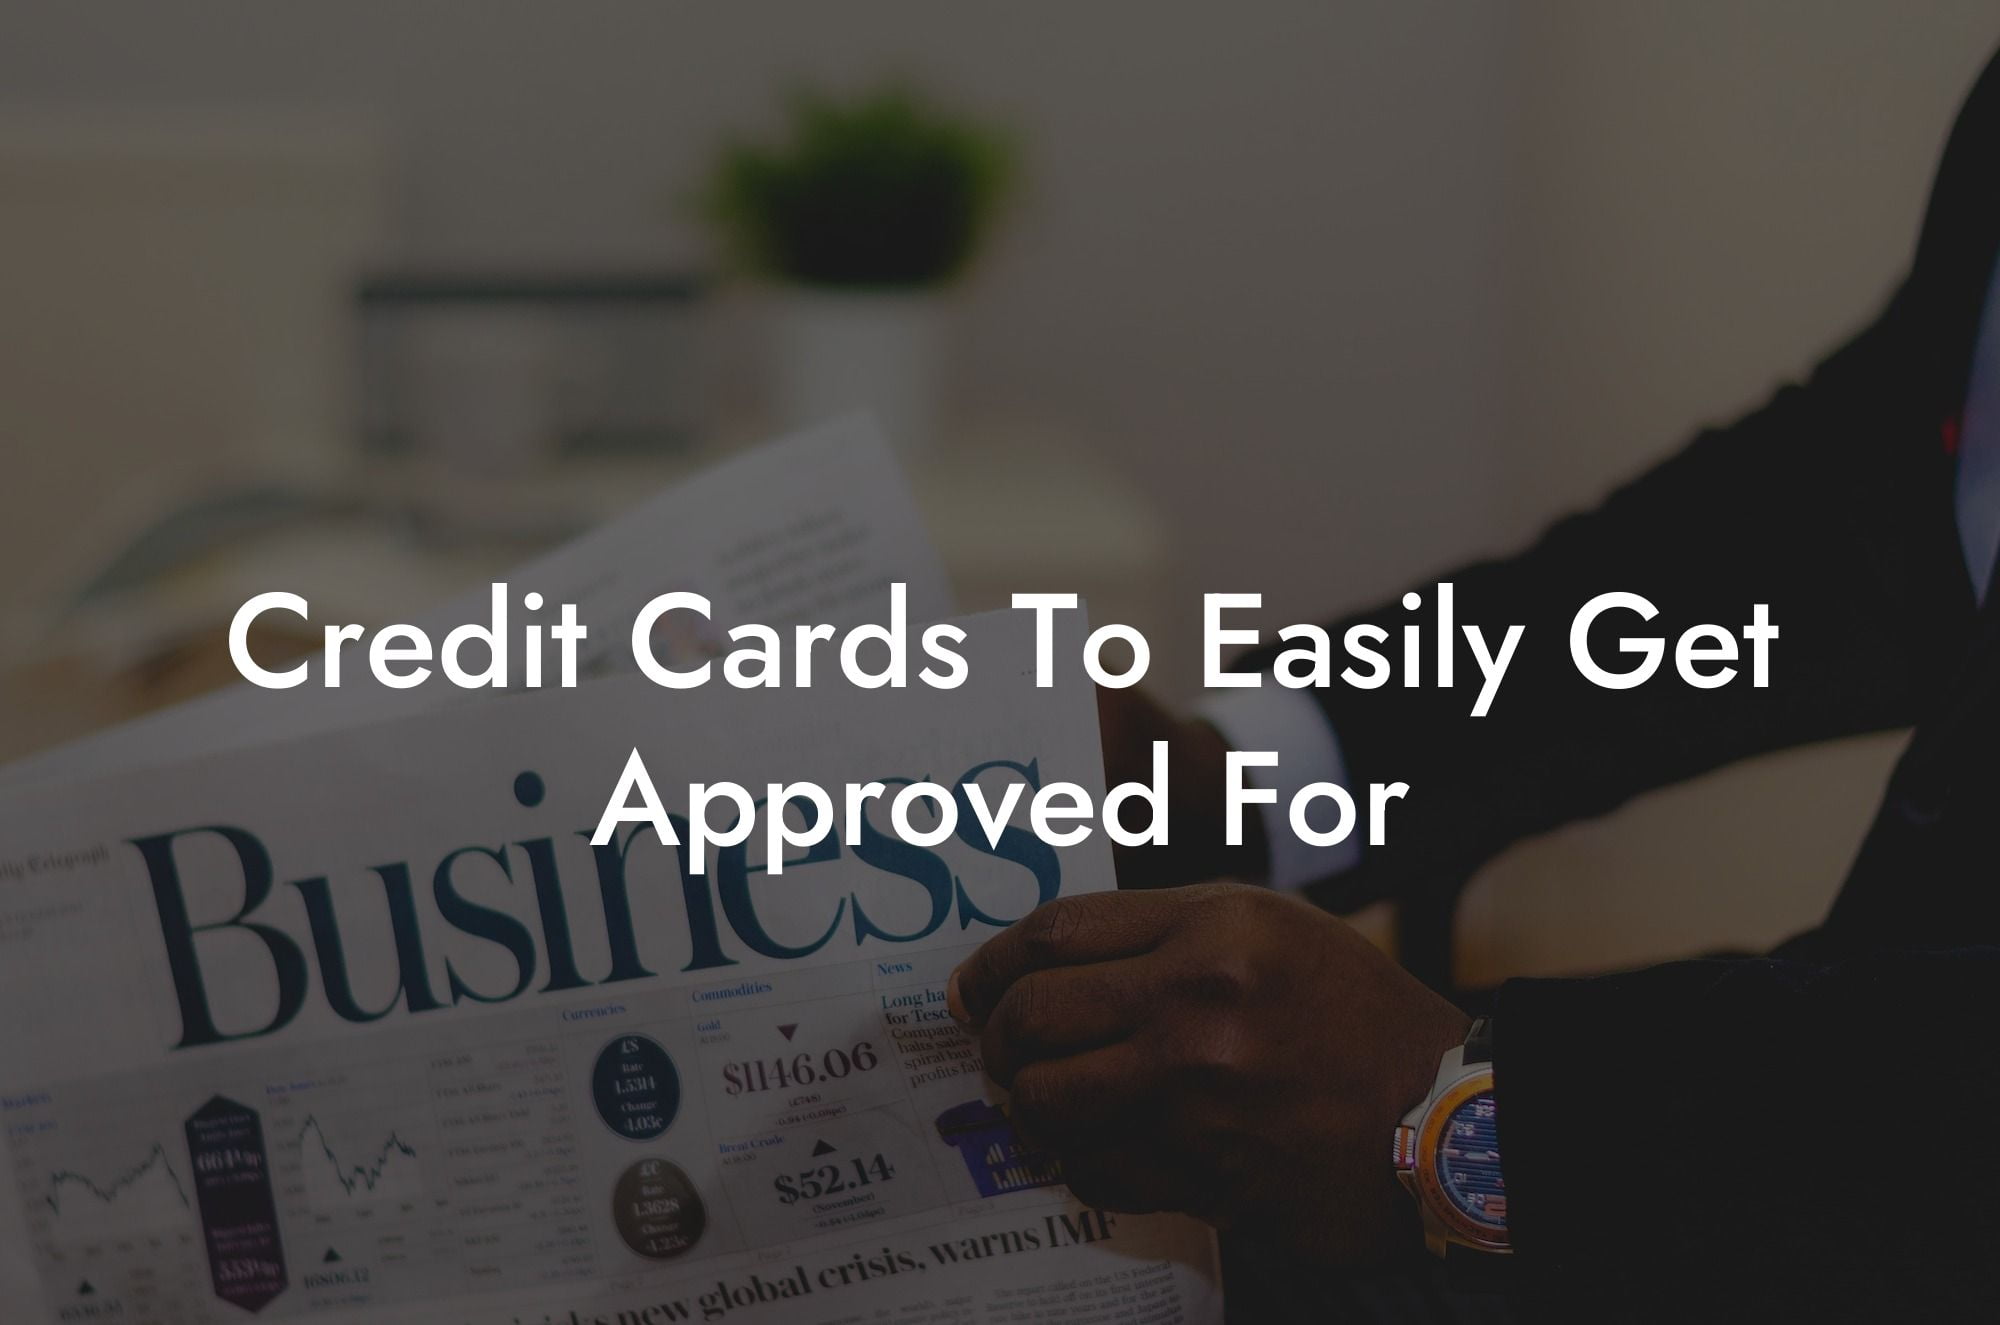 Credit Cards To Easily Get Approved For